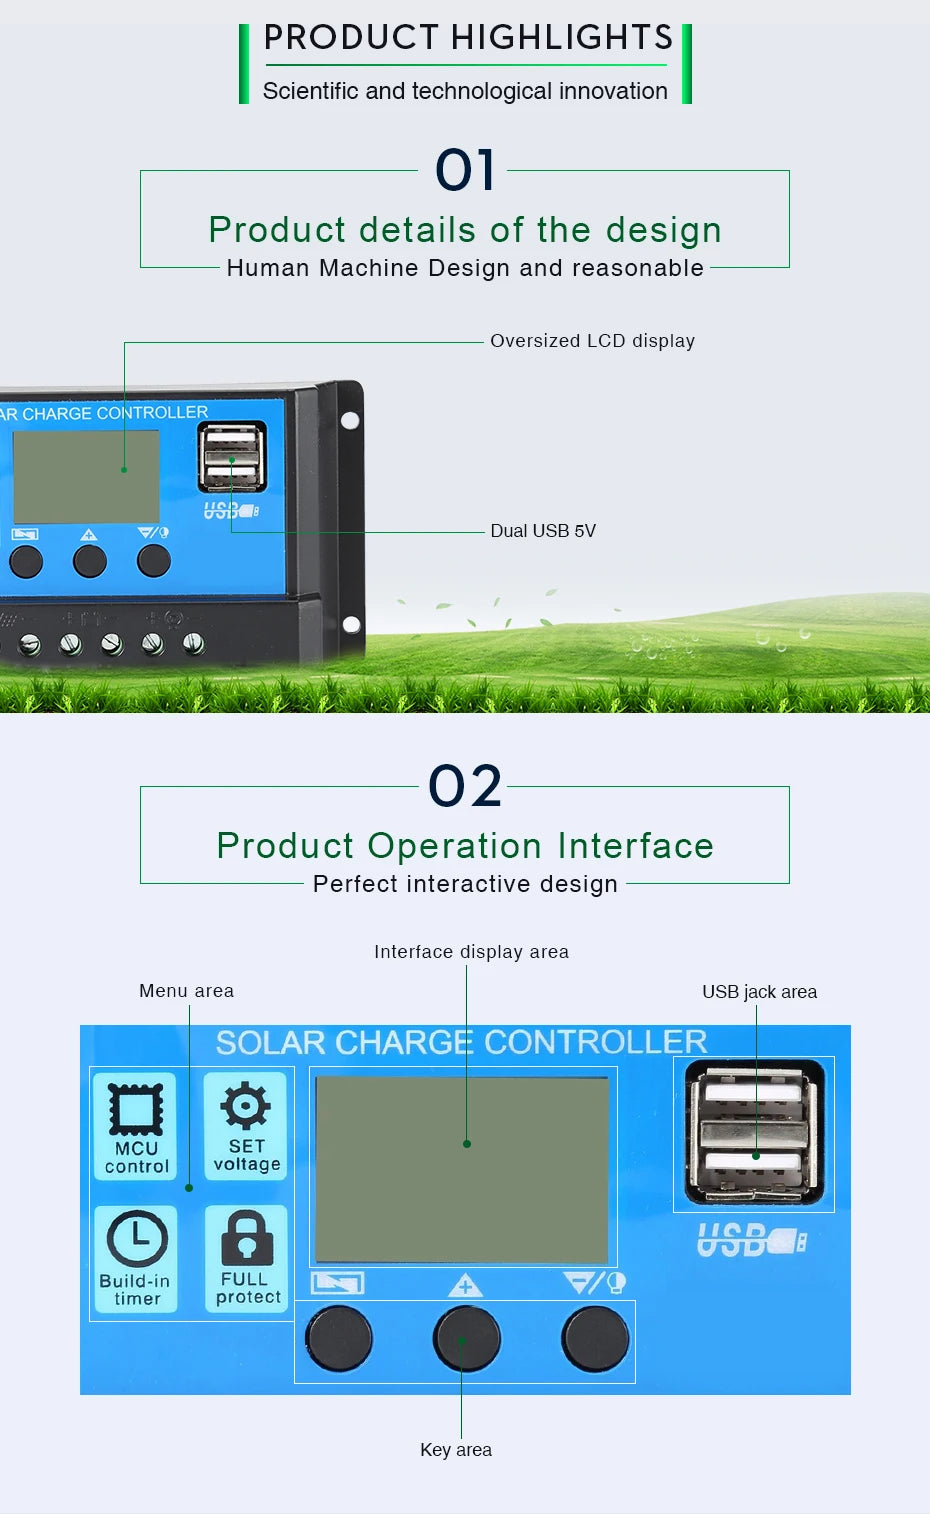 EASUN POWER Solar Controller, Innovative solar controller with large LCD display, dual USB ports, and built-in timer/voltage controls for safe charging.